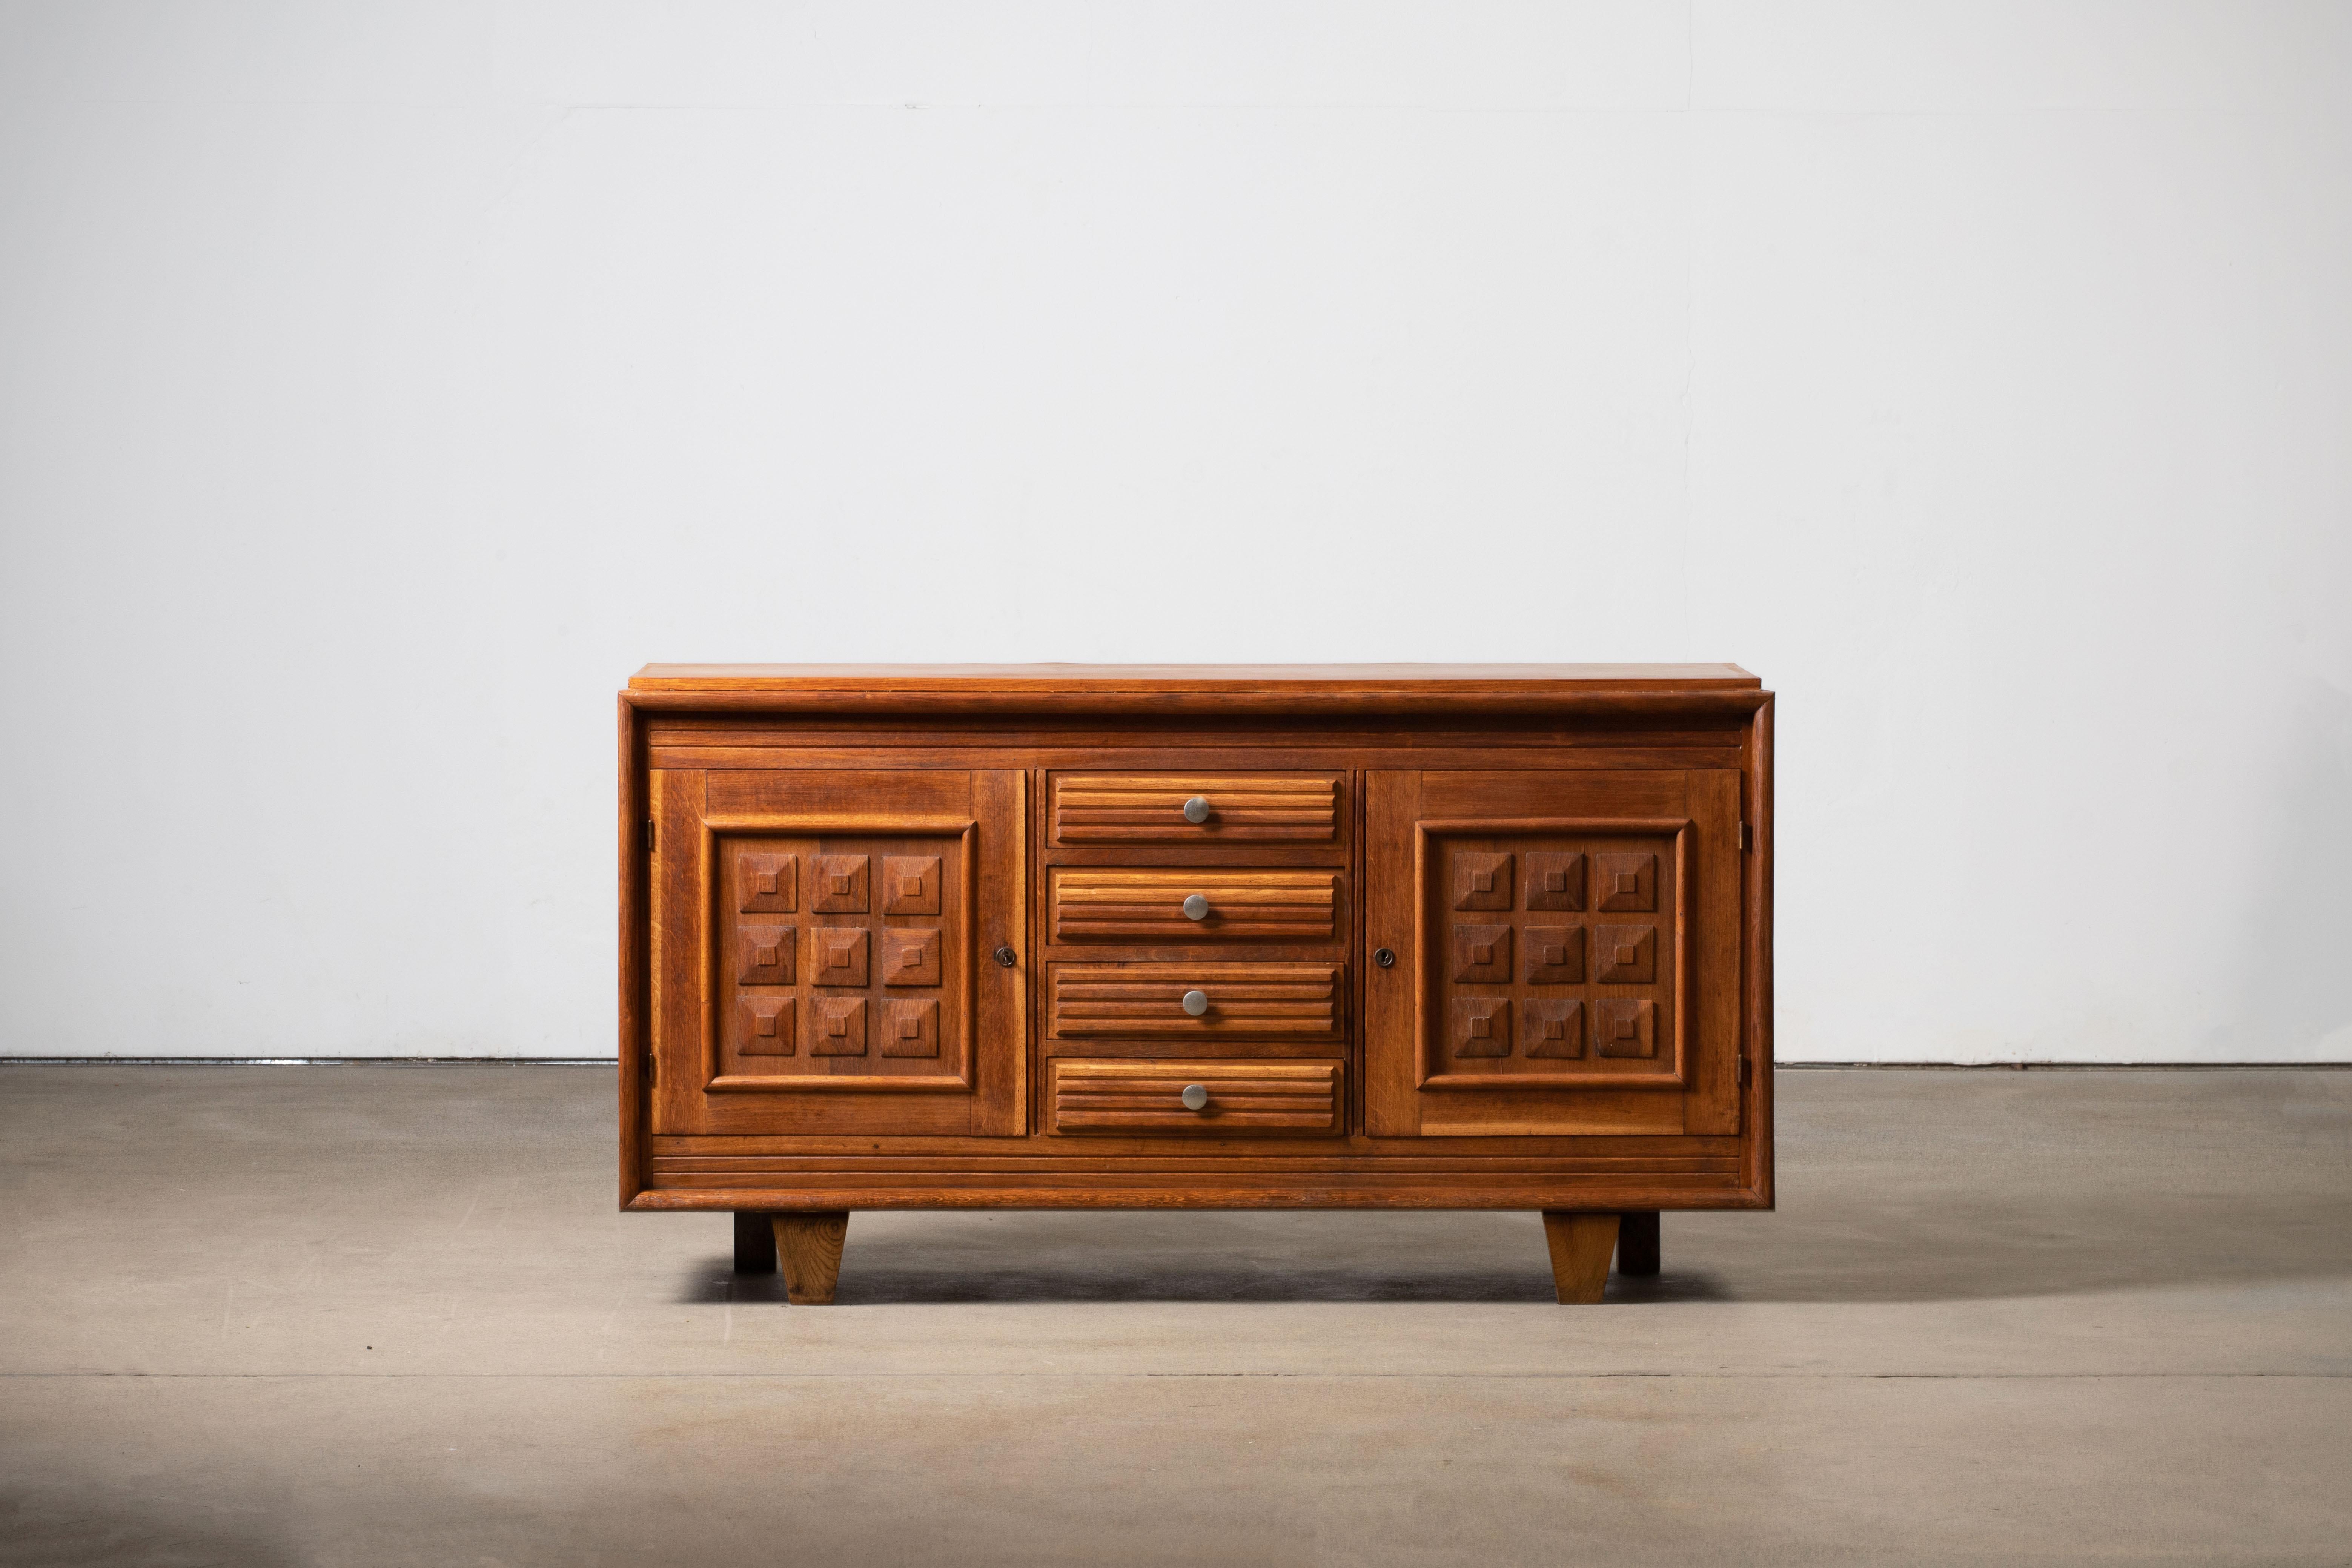 Credenza, solid oak, France, 1940s.
Large Art Deco Brutalist sideboard. 
The credenza consists of four central drawers and two storage facilities and covered with very detailed designed door panels. 
The refined wooden structures on the doors